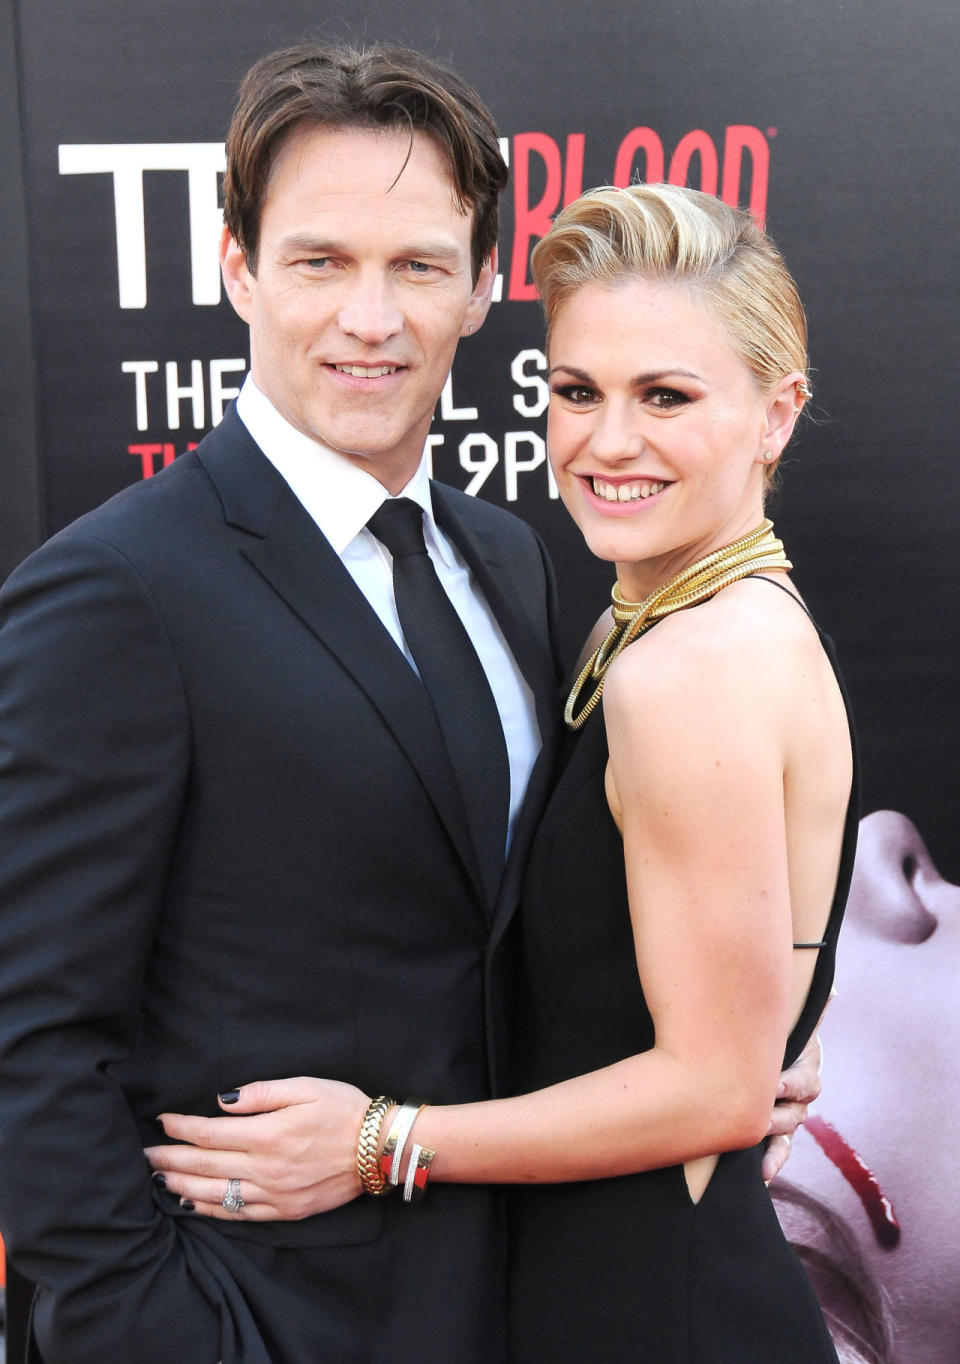 Stephen Moyer and Anna Paquin